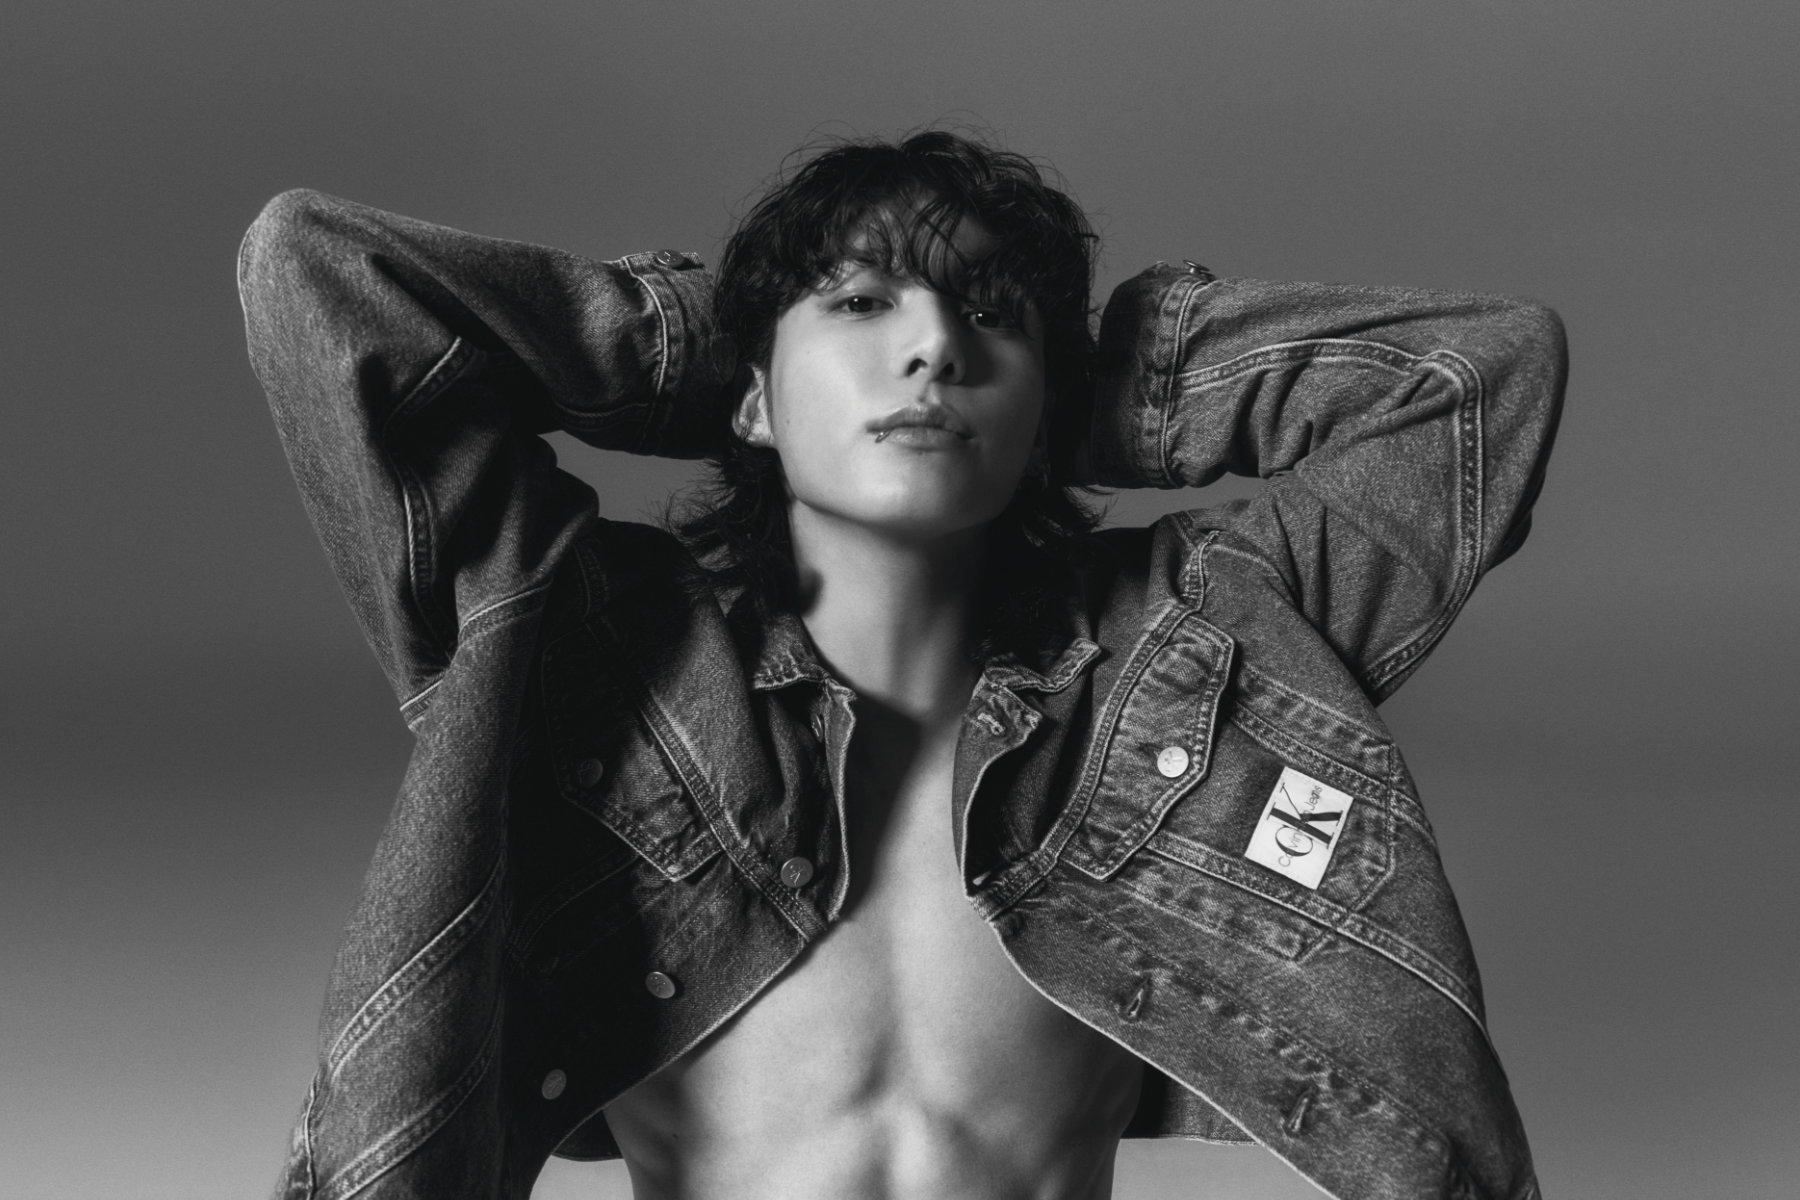 Golden JK Universe on X: Media: Jungkook's Calvin Klein As is CK'S  biggest-ever campaign. BTS member Jungkook is Calvin Klein's biggest brand  ambassador ever, full stop. Jungkook's Calvin Klein ad is probably